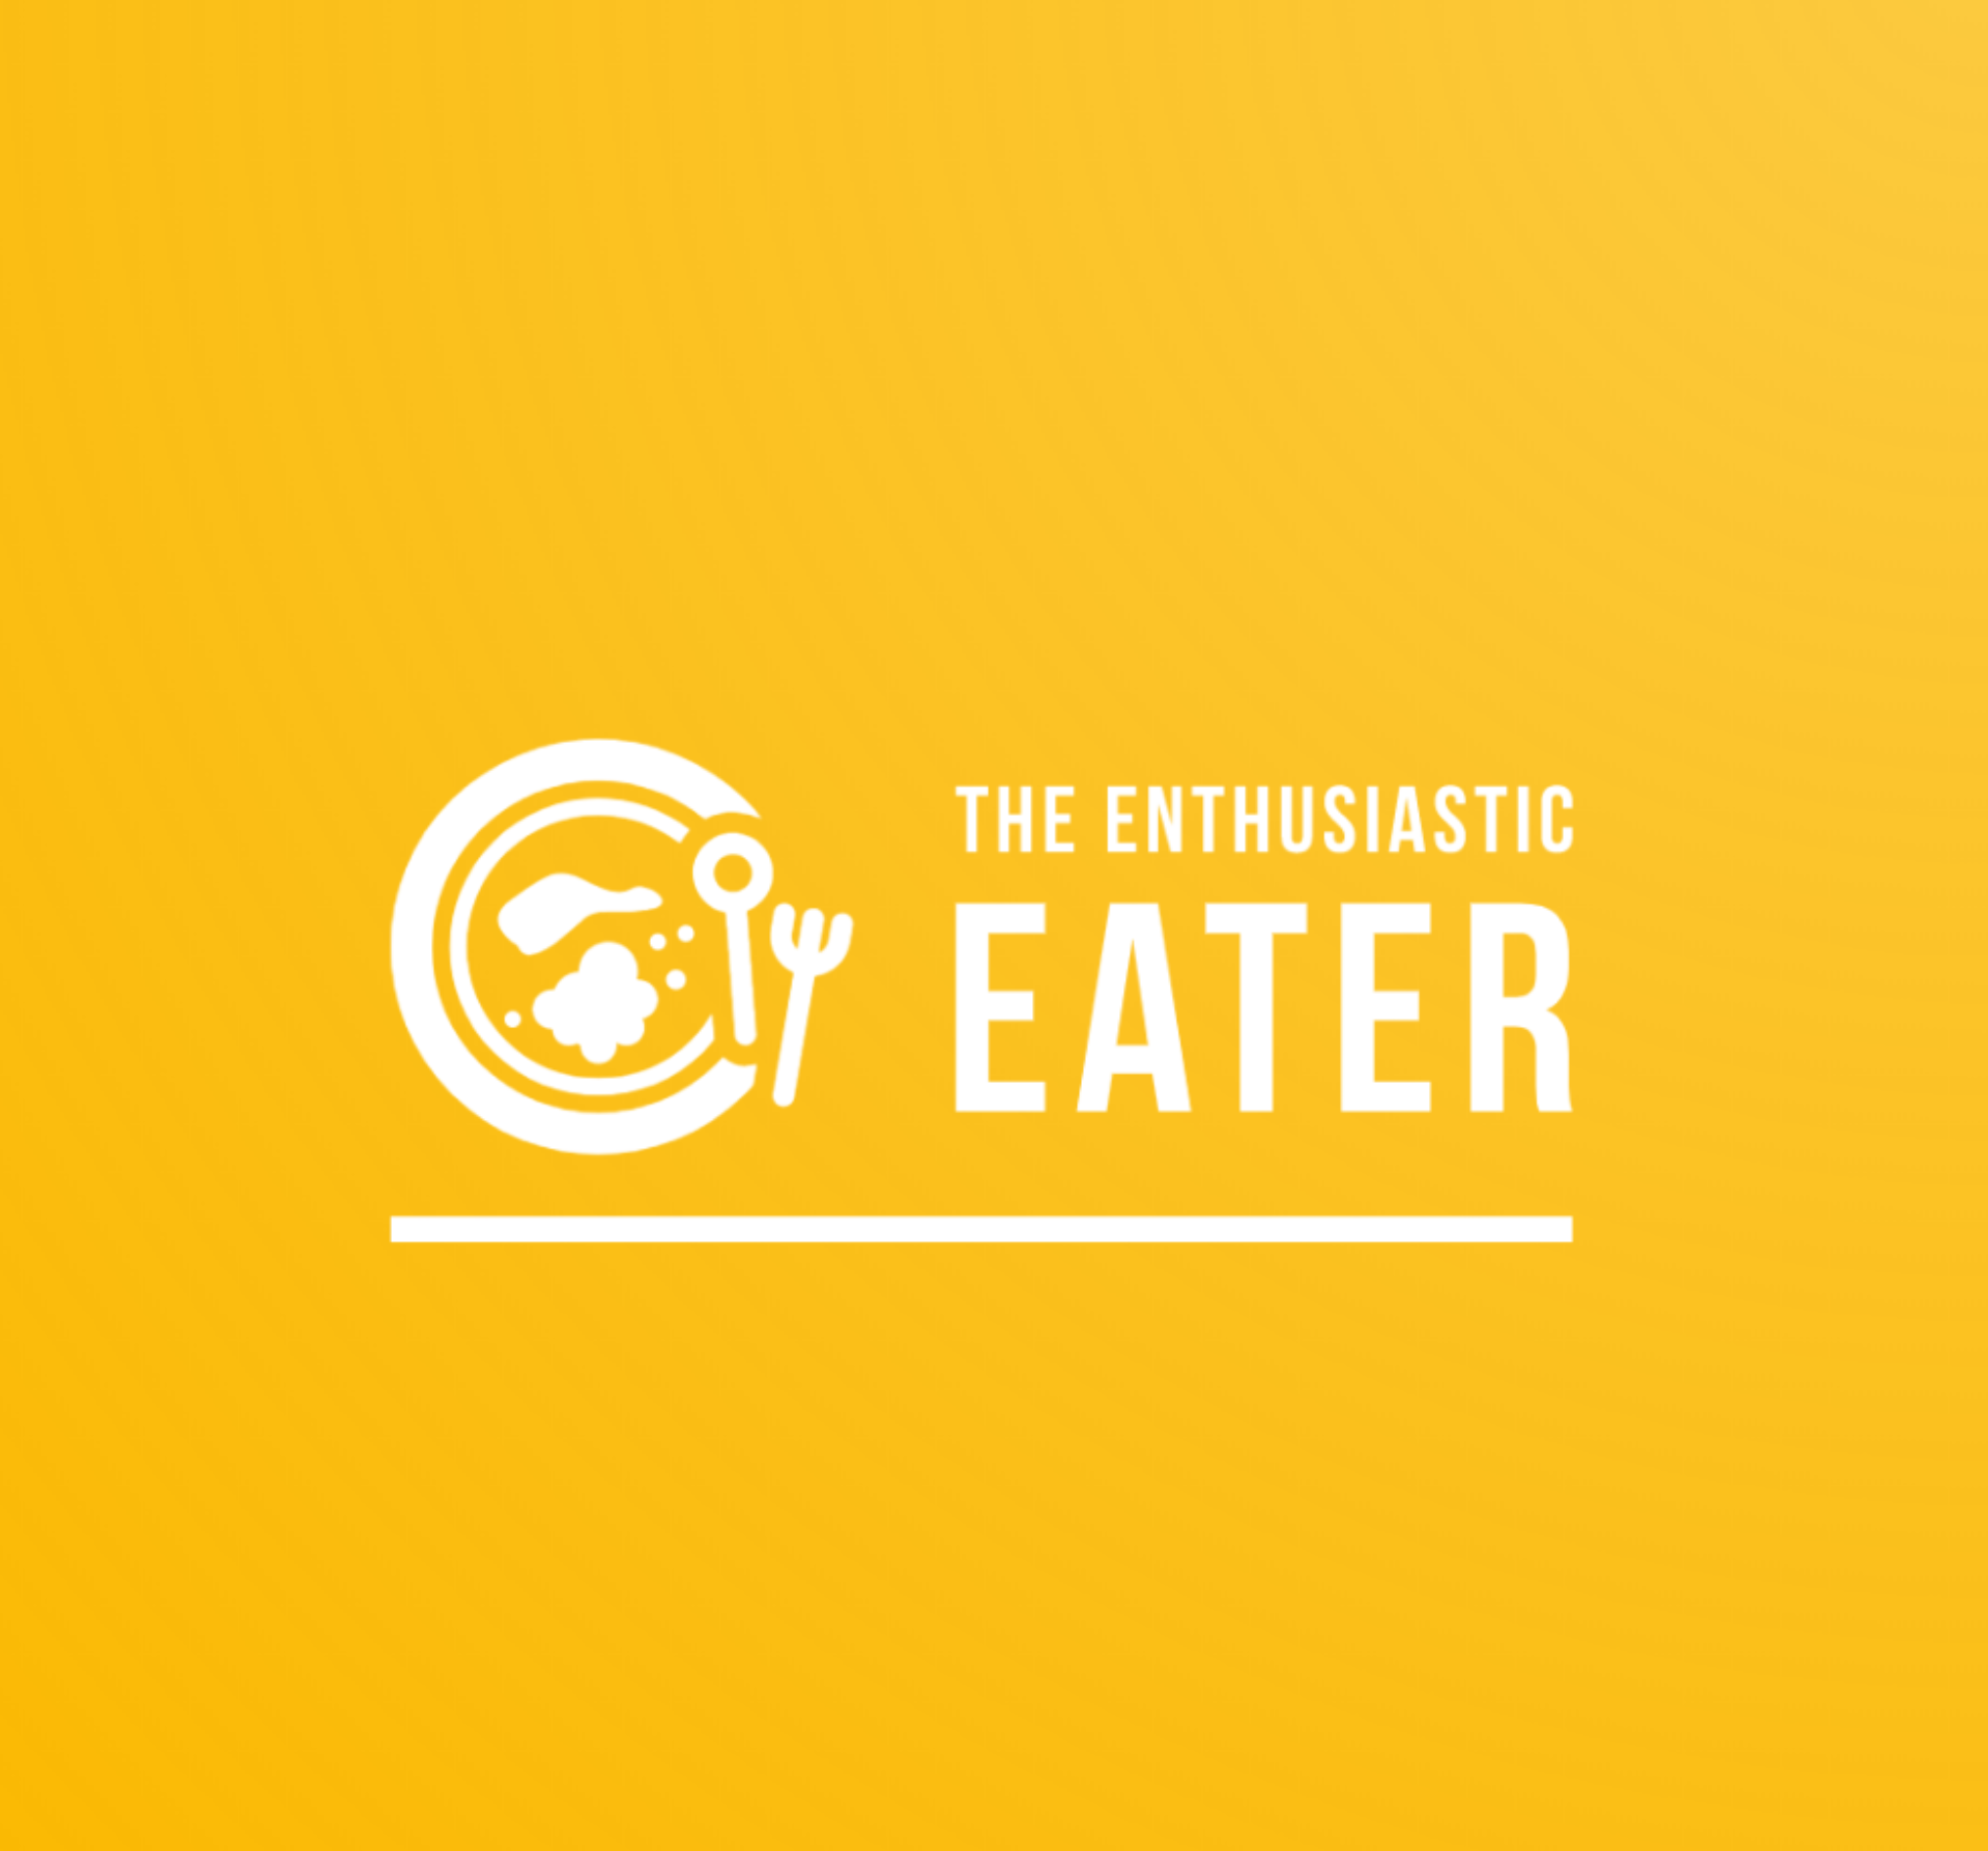 The Enthusiastic Eater